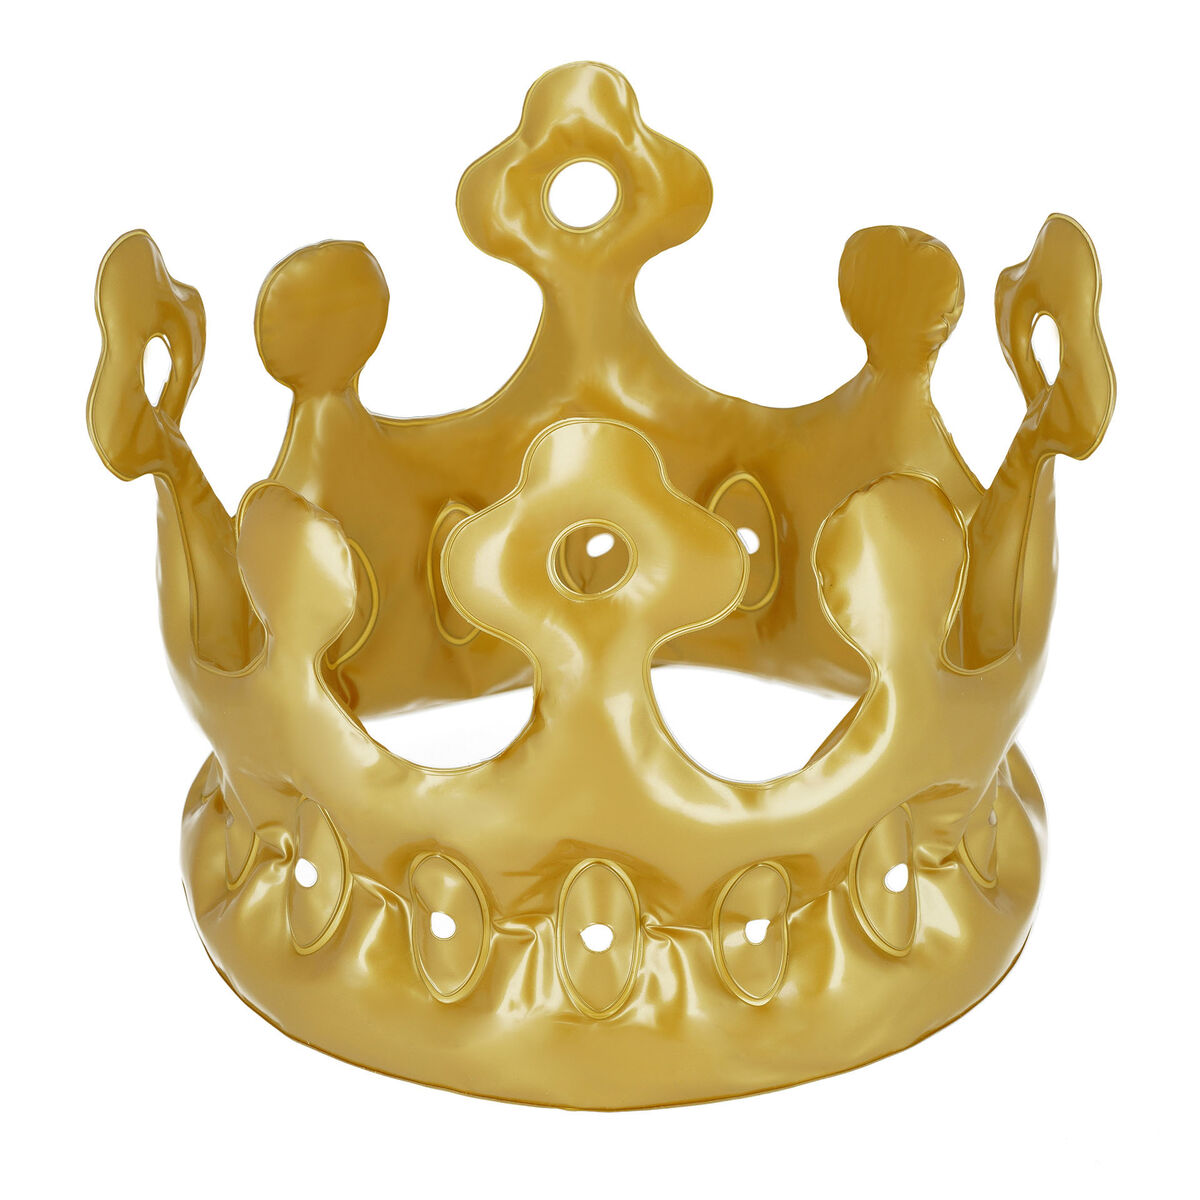 Fab Gifts | Legami Inflatable Crown Party King by Weirs of Baggot Street